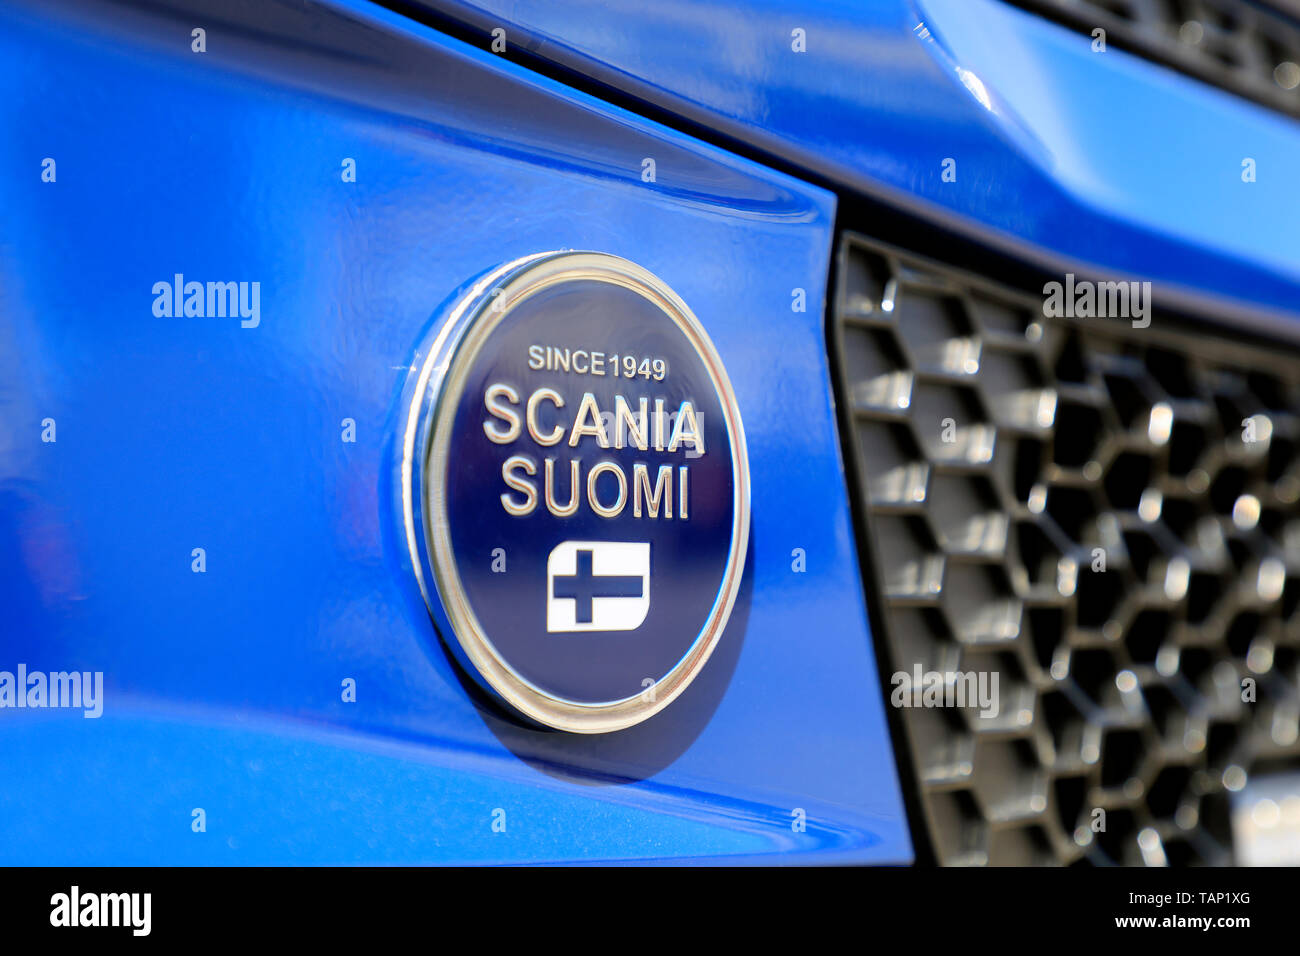 Helsinki, Finland. 09 May, 2019. Scania Suomi Since 1949 logo on a Scania truck as seen on Scania Suomi 70 Years Anniversary Event, held during Transport-Logistics 2019. Credit: Taina Sohlman/agefotostock Stock Photo